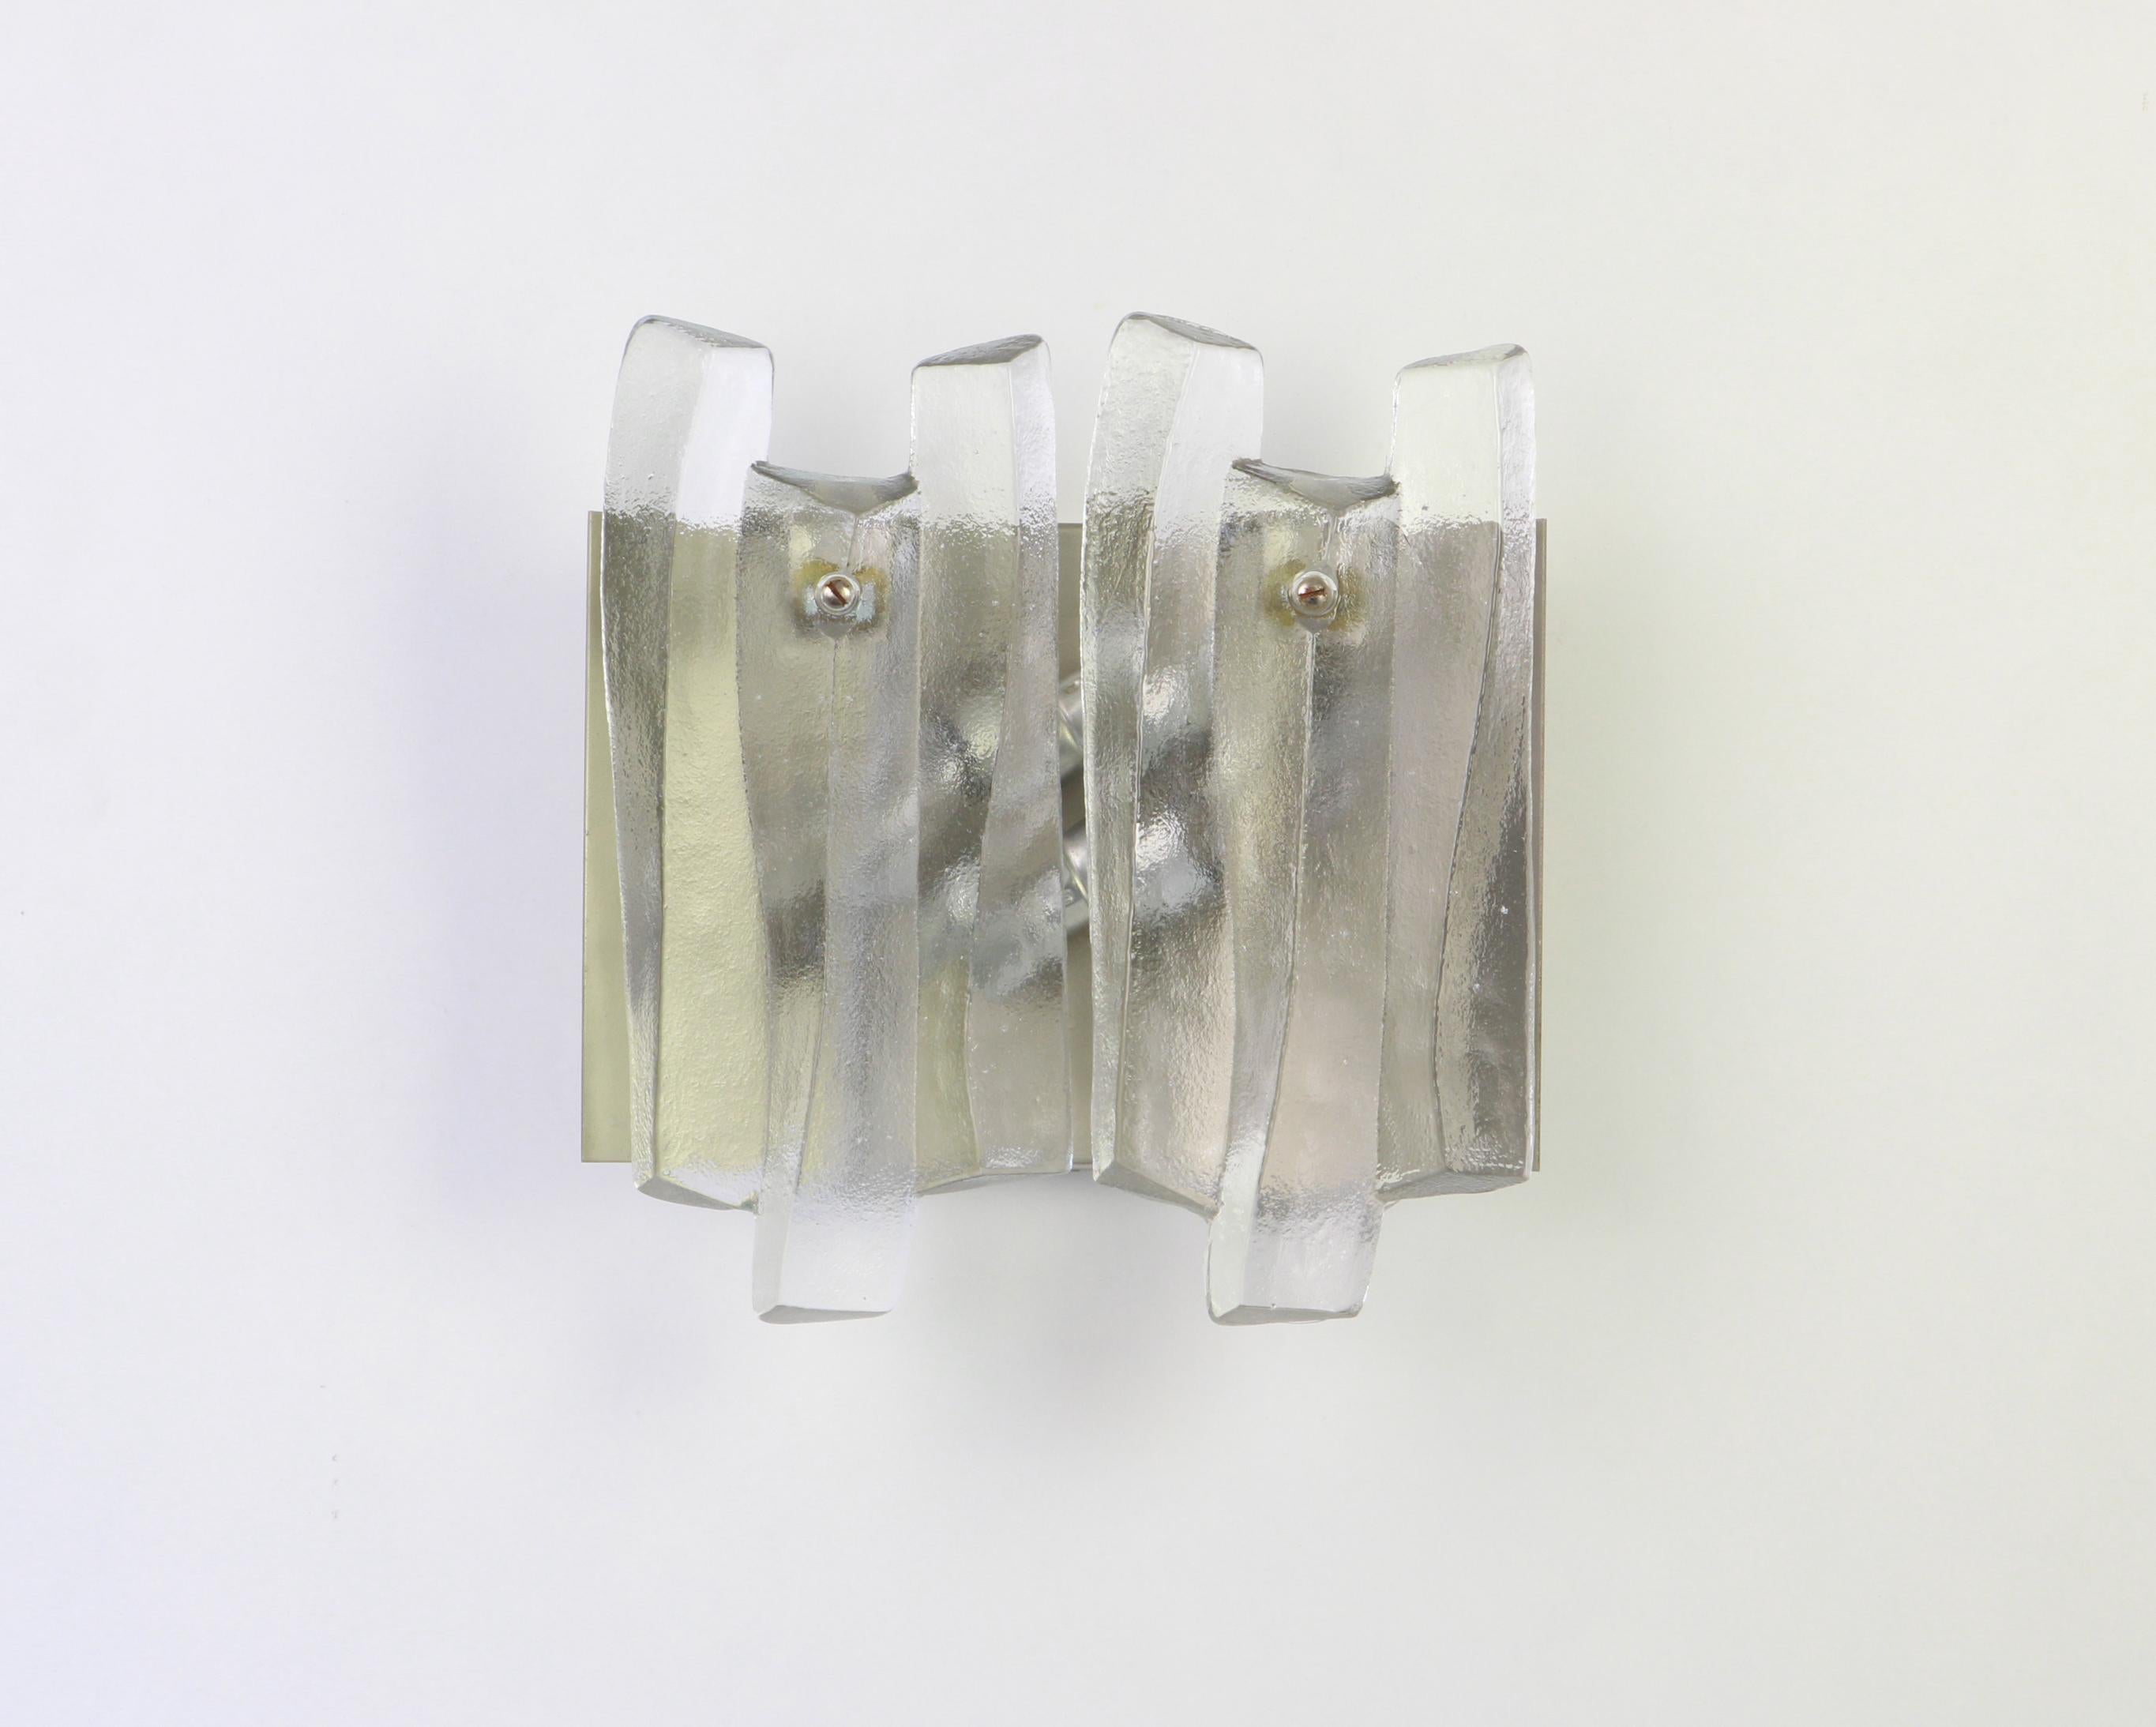 Mid-Century Modern Pair of Large Murano Glass Sconces by Kalmar 'Fuente', Austria, 1960s For Sale